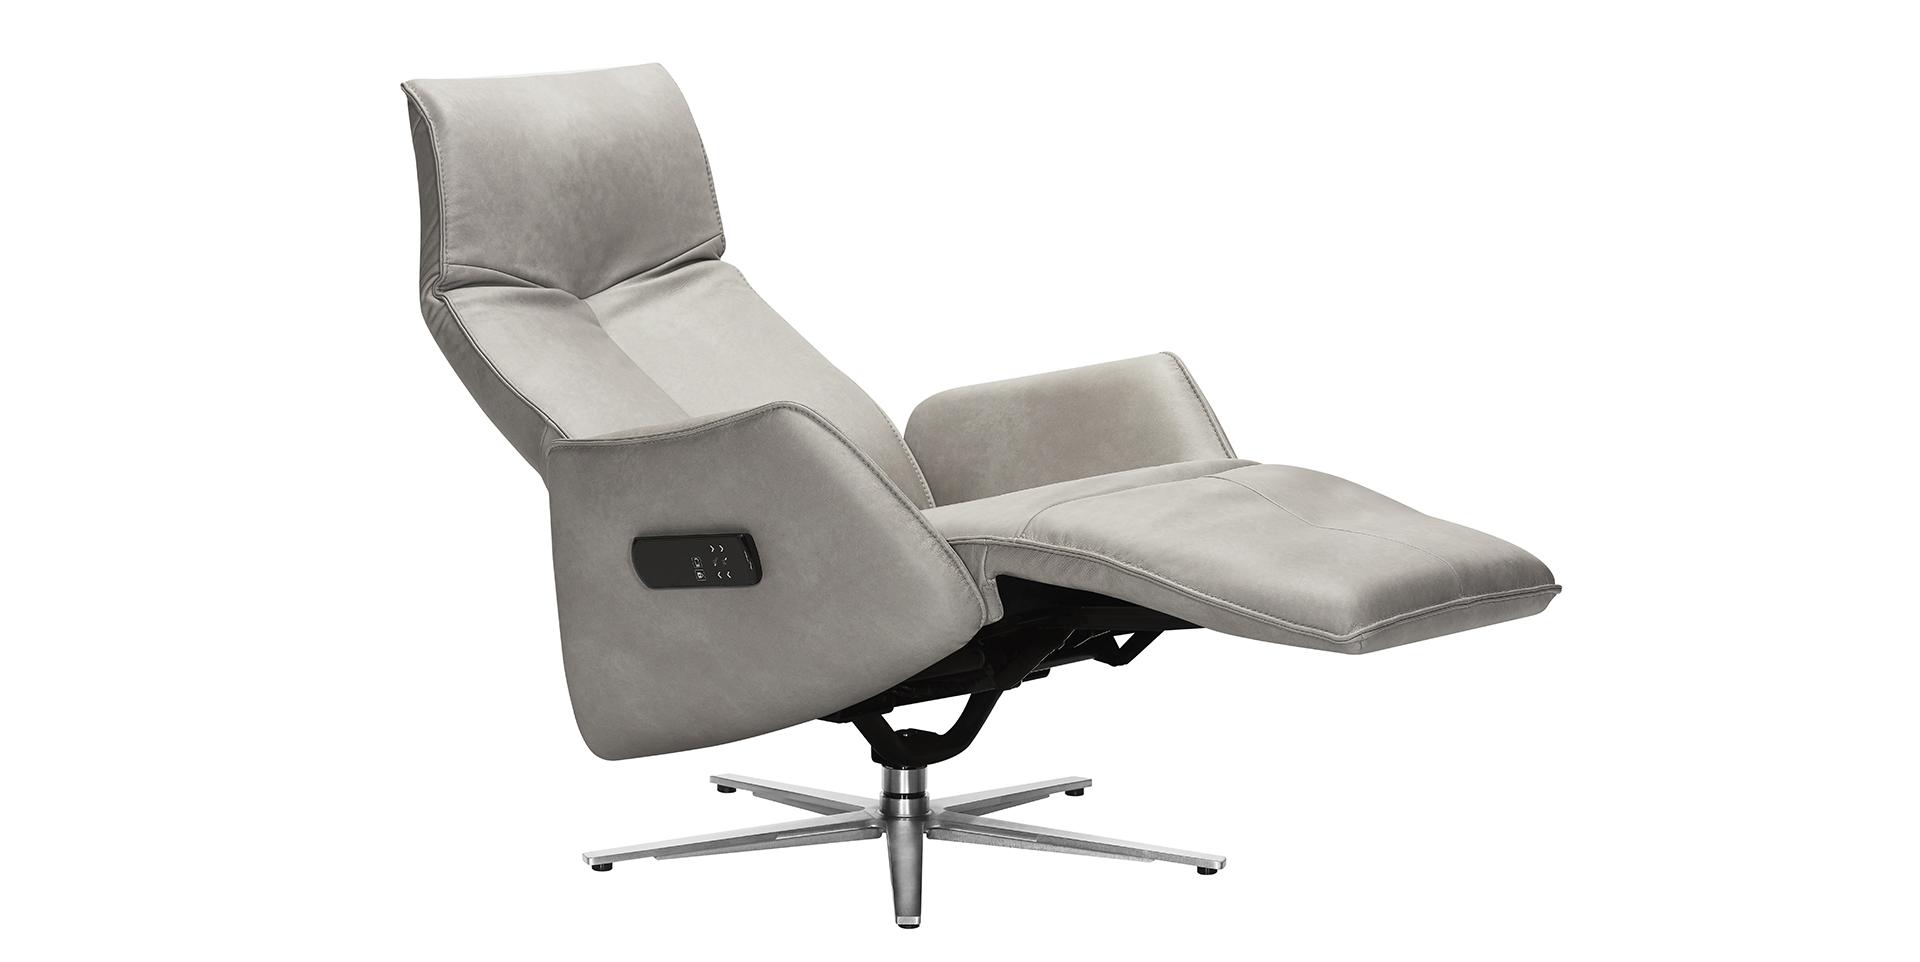 Slider Fauteuil relaxation 7917 (image 4)